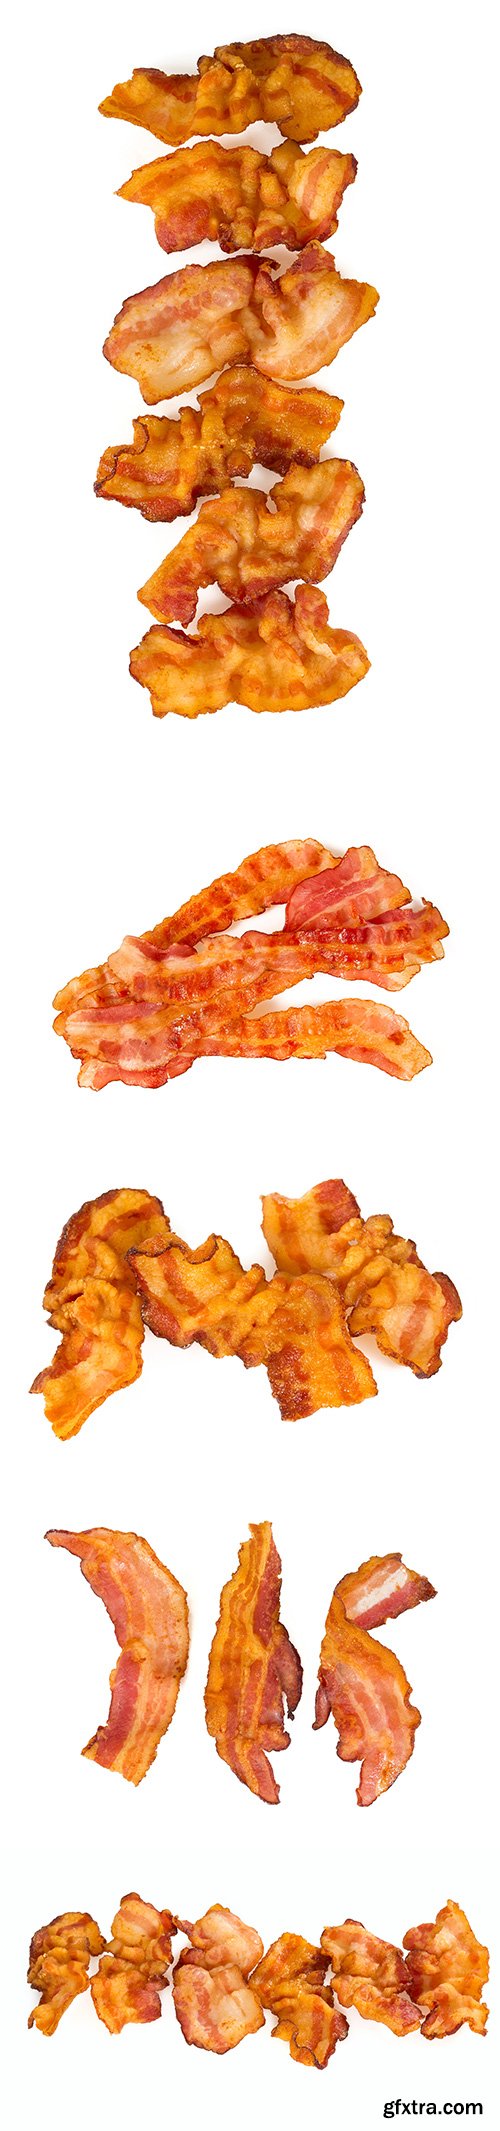 Fried Bacon Isolated - 10xJPGs